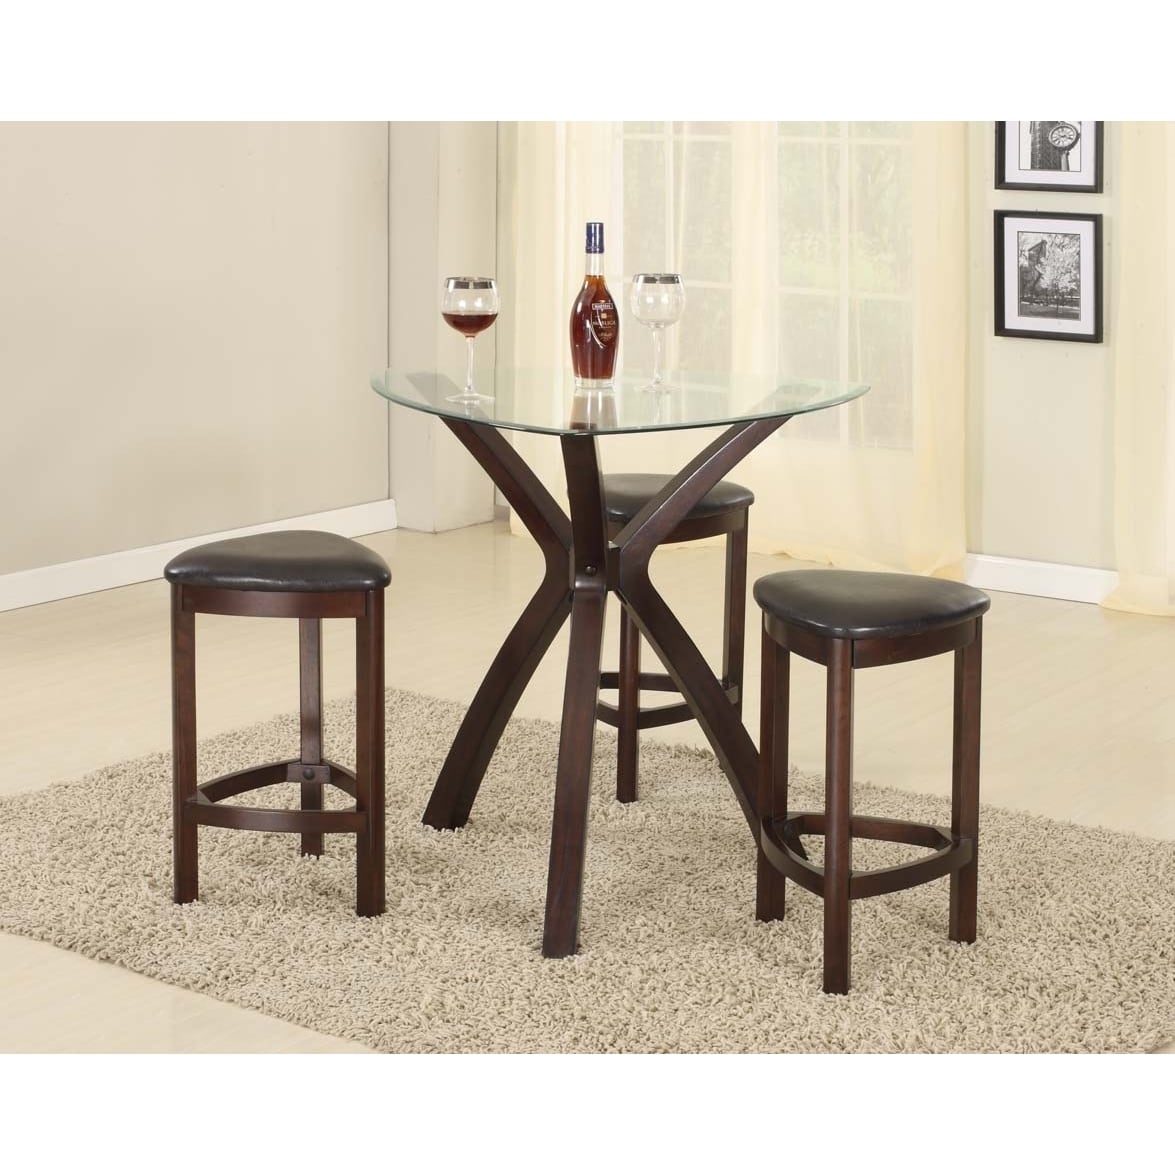 Roundhill Furniture 4-Piece Triangle Solid Wood Bar Table and Stools Set, Espresso